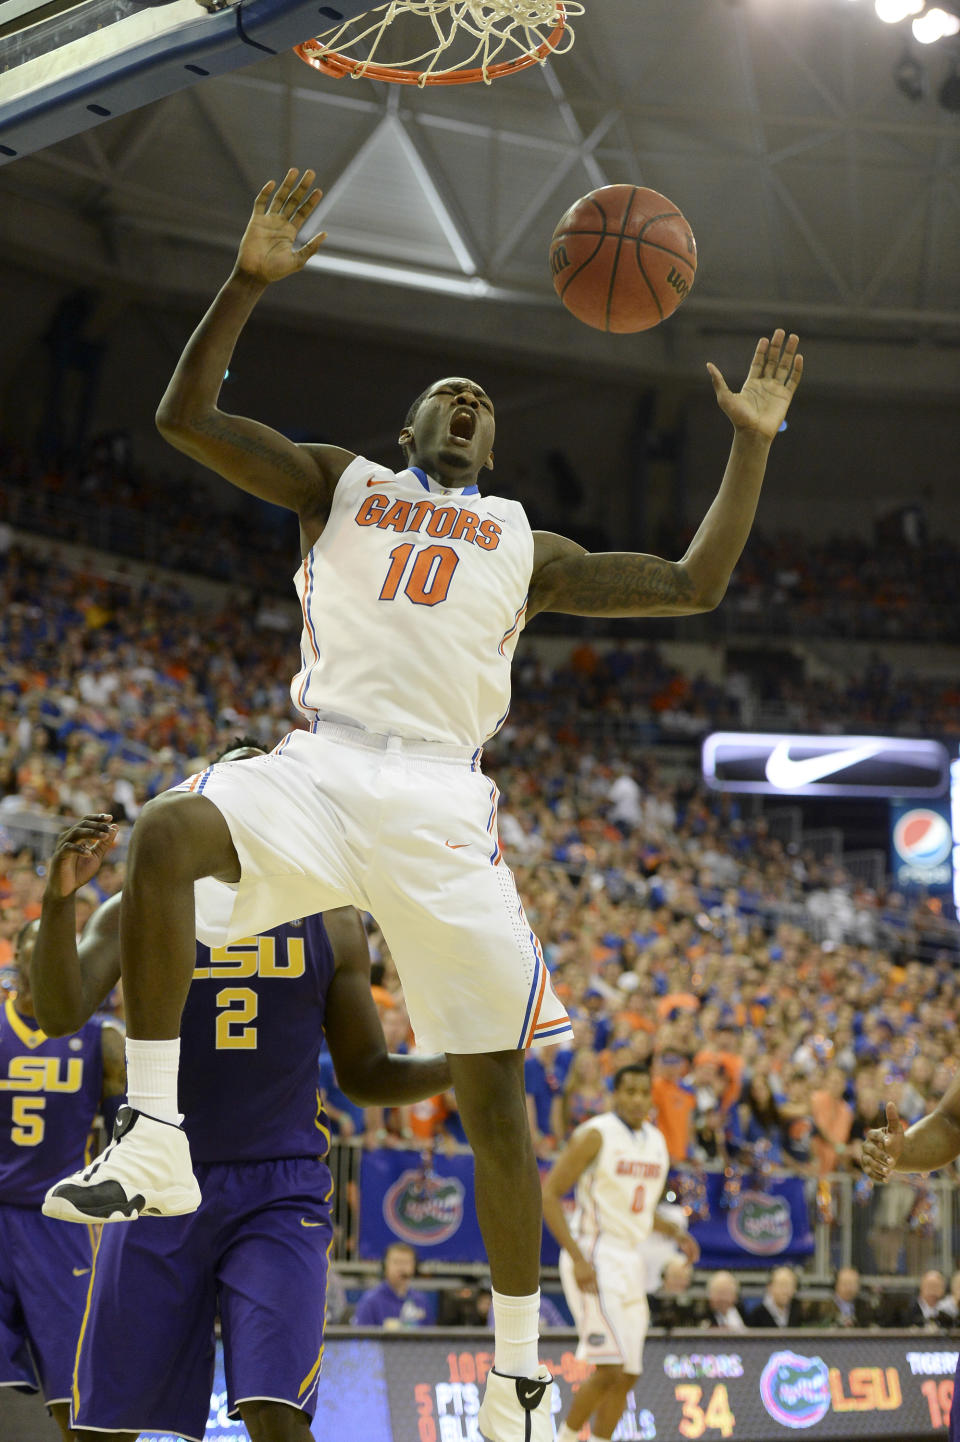 Florida forward Dorian Finney-Smith (10) jams the ball through the basket as LSU forward Johnny O'Bryant III (2) stands nearby during the first half of an NCAA college basketball game on Saturday, March 1, 2014, in Gainesville, Fla. (AP Photo/Phil Sandlin)